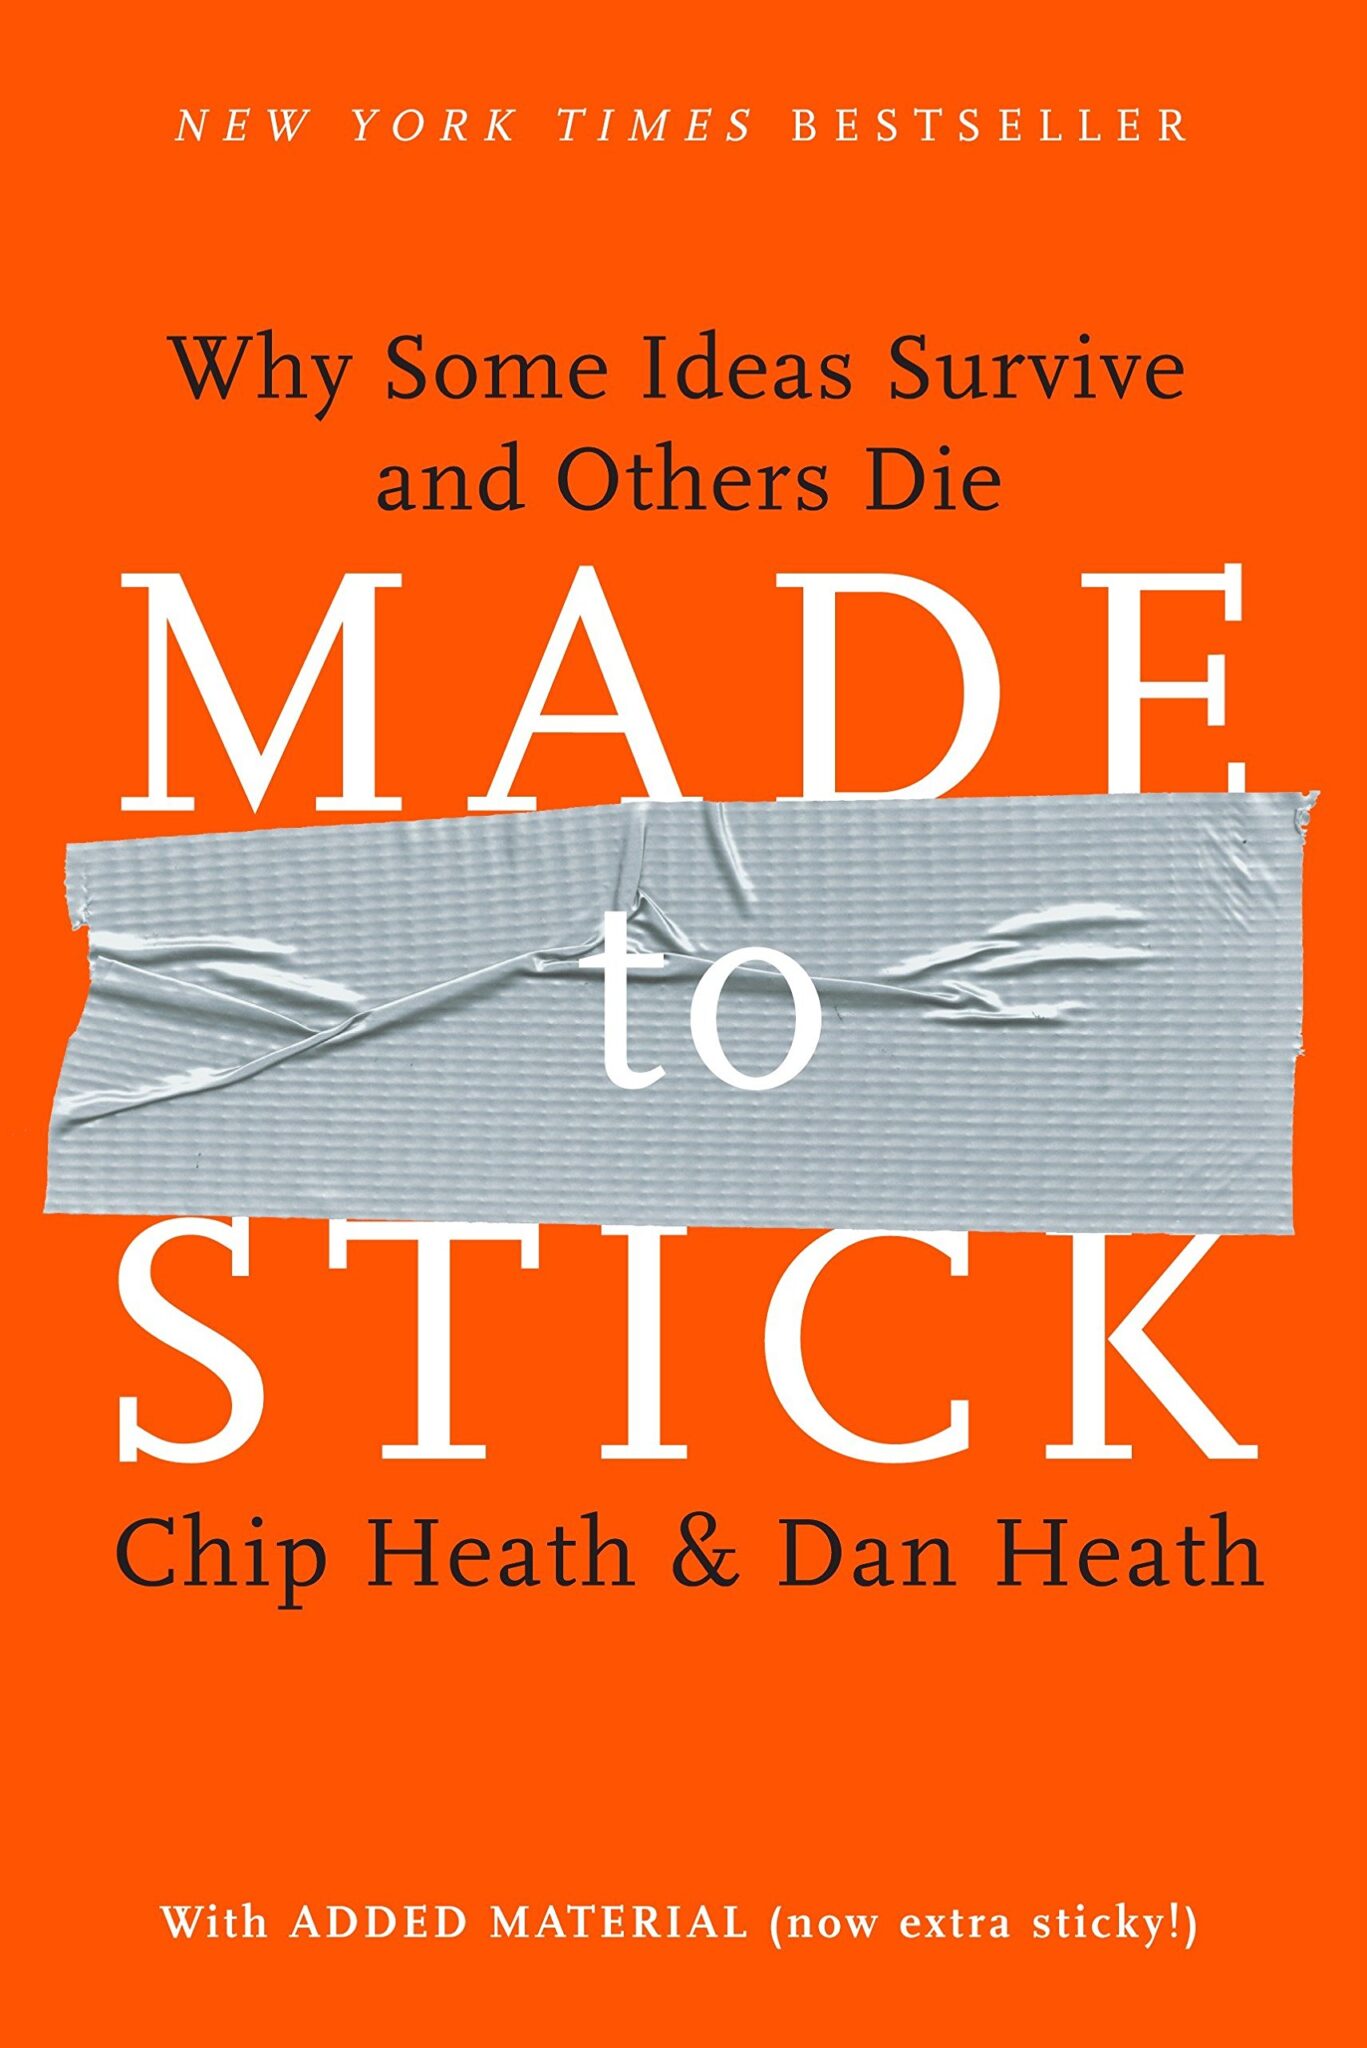 Made to Stick: Best Business Books for Beginners